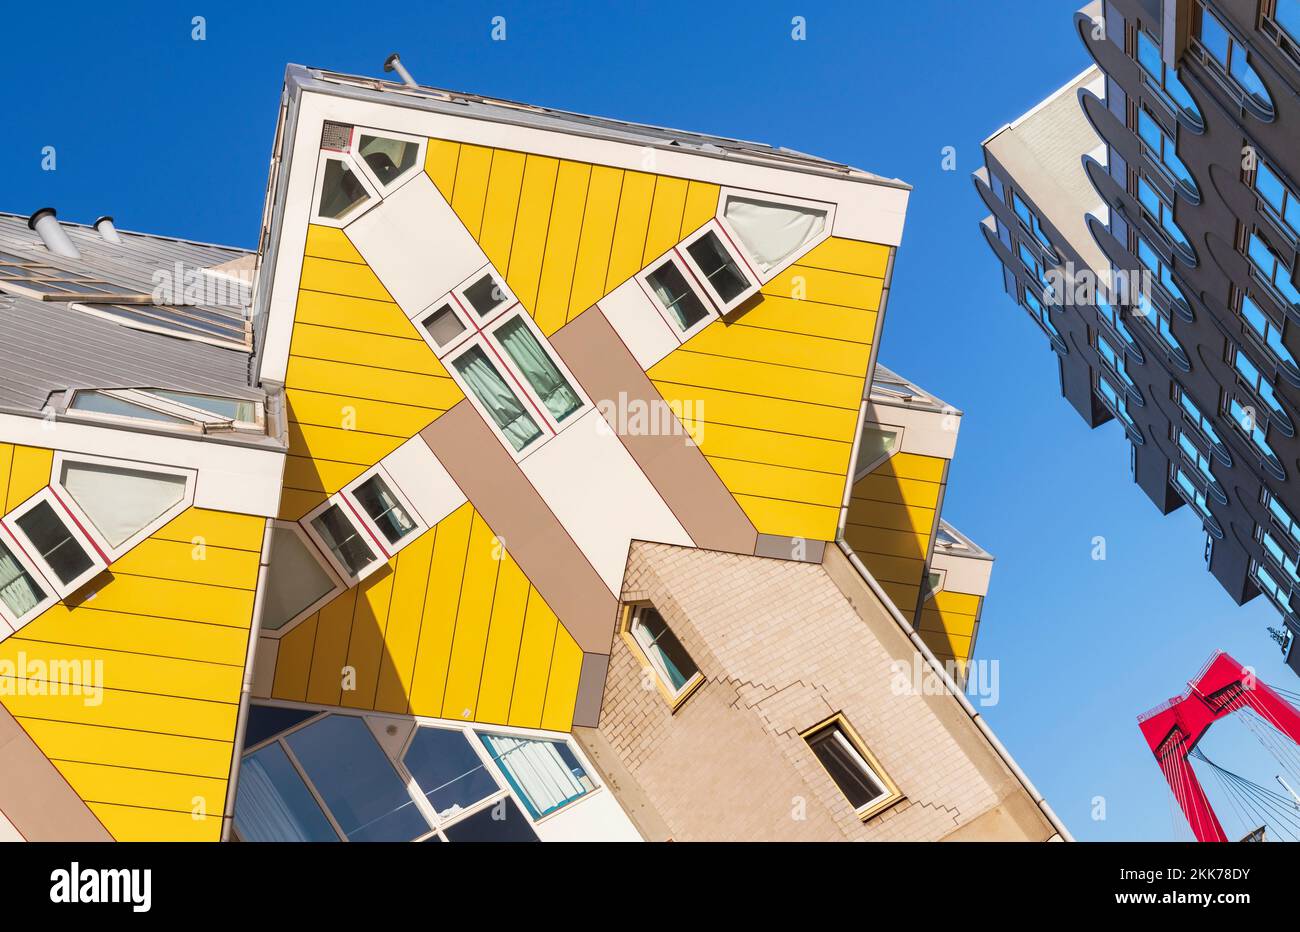 Holland, Rotterdam, The Cube Houses, an innovative housing development where each house is a cube tilted over by 45 degrees, designed by Dutch architect Piet Blom and bult between 1977 and 1984, angular view with apartment block and Willemsbrug or William's Bridge in the background. Stock Photo